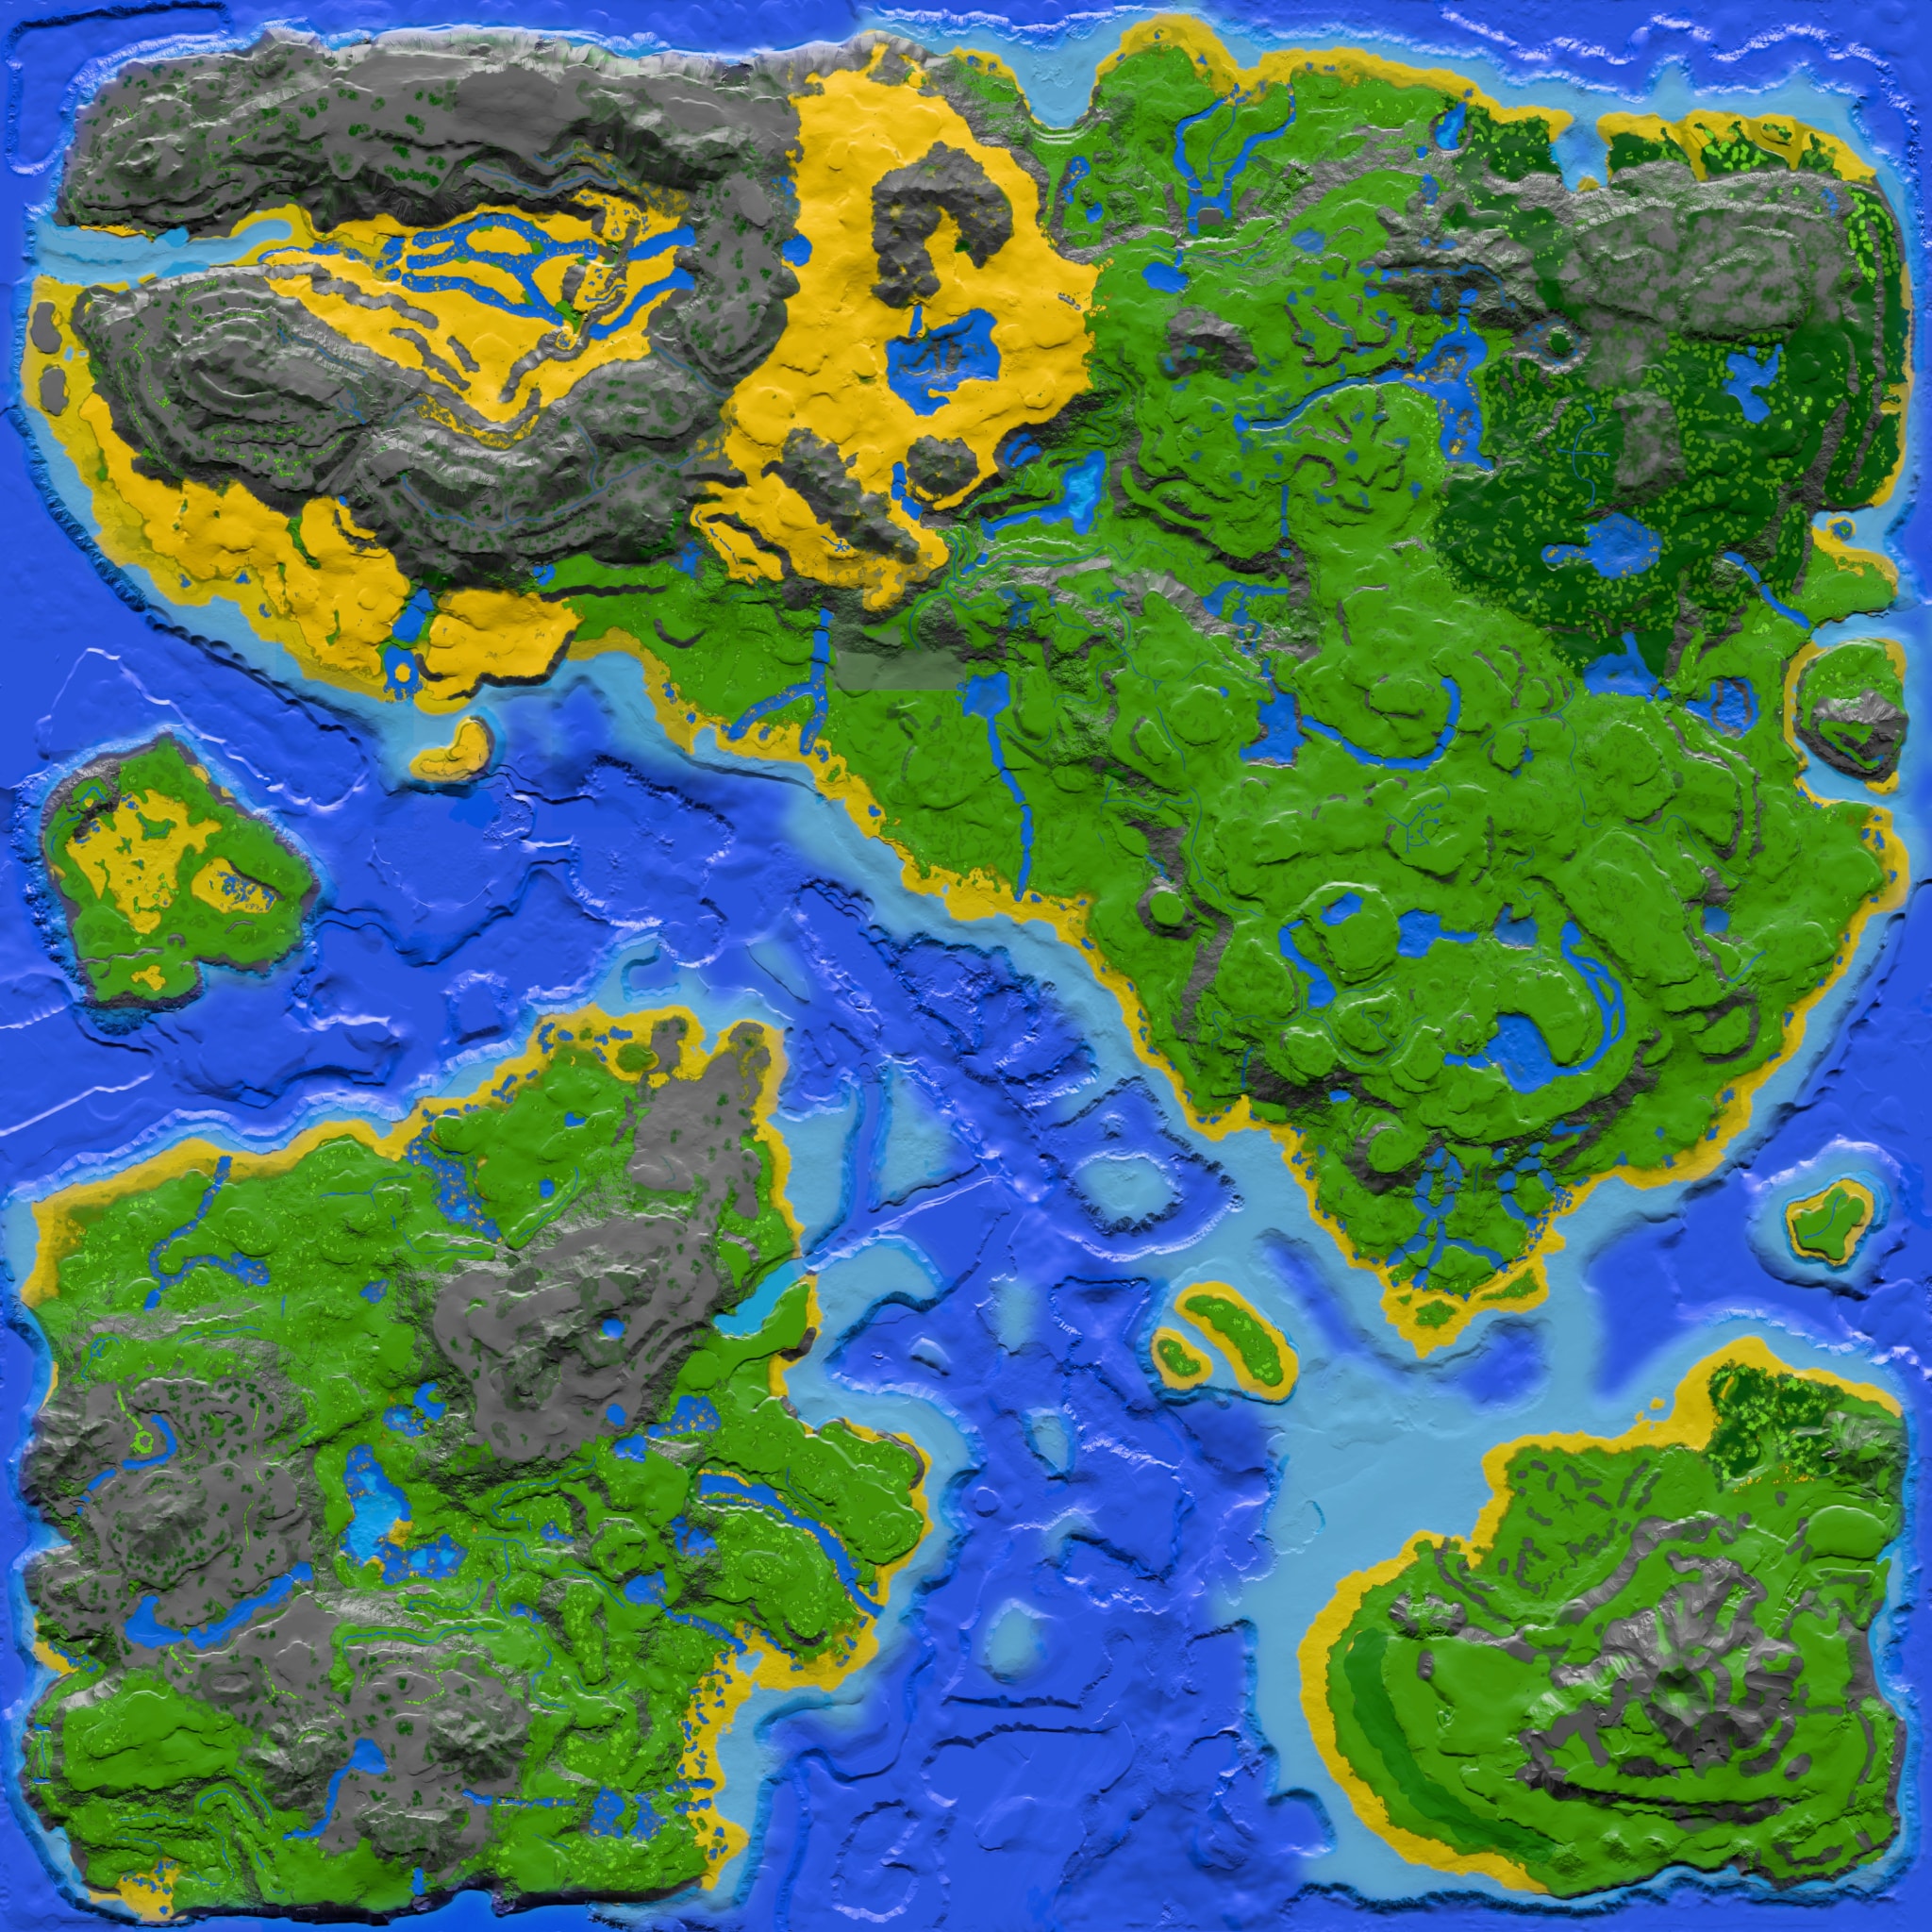 File:Fjordur Topographic Map.jpg - ARK Official Community Wiki